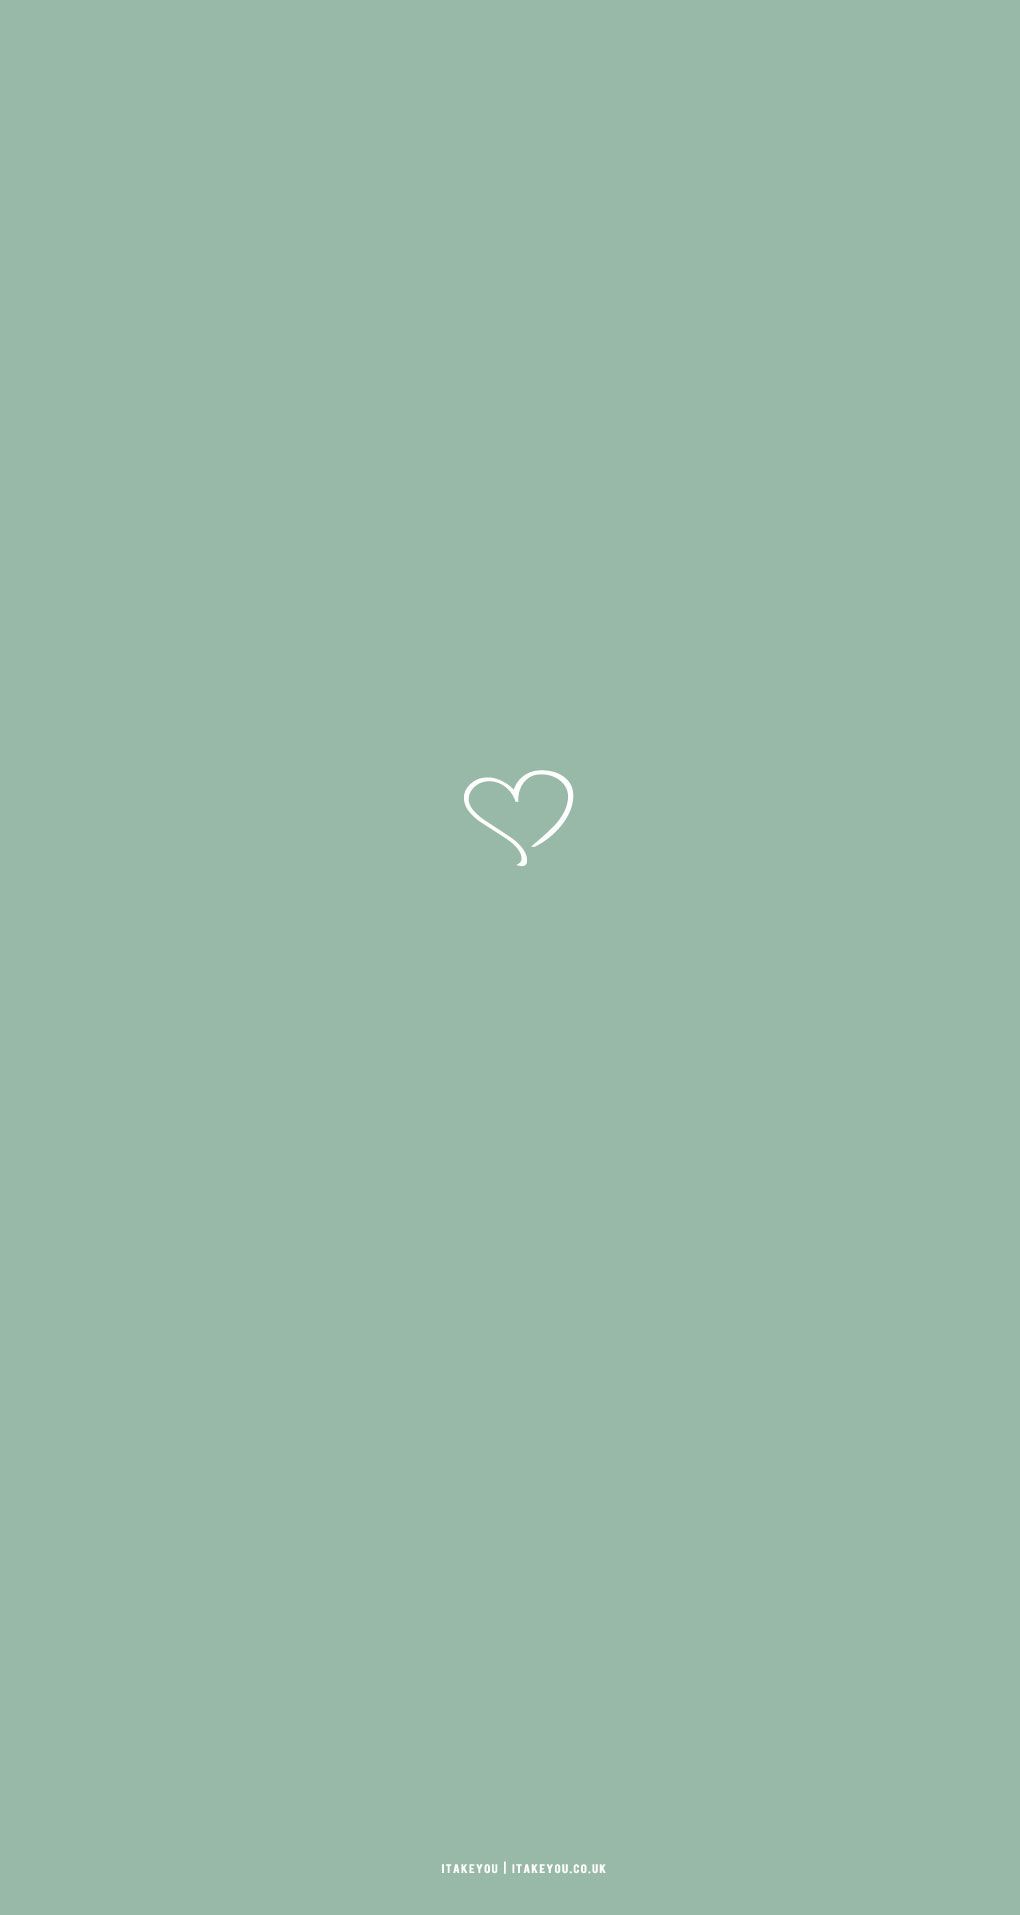 Free download 15 Sage Green Minimalist Wallpaper for Phone Cute Heart I Take [1020x1915] for your Desktop, Mobile & Tablet. Explore Green Minimalist Aesthetic Wallpaper. Minimalist Background, Minimalist Wallpaper, Minimalist Wallpaper